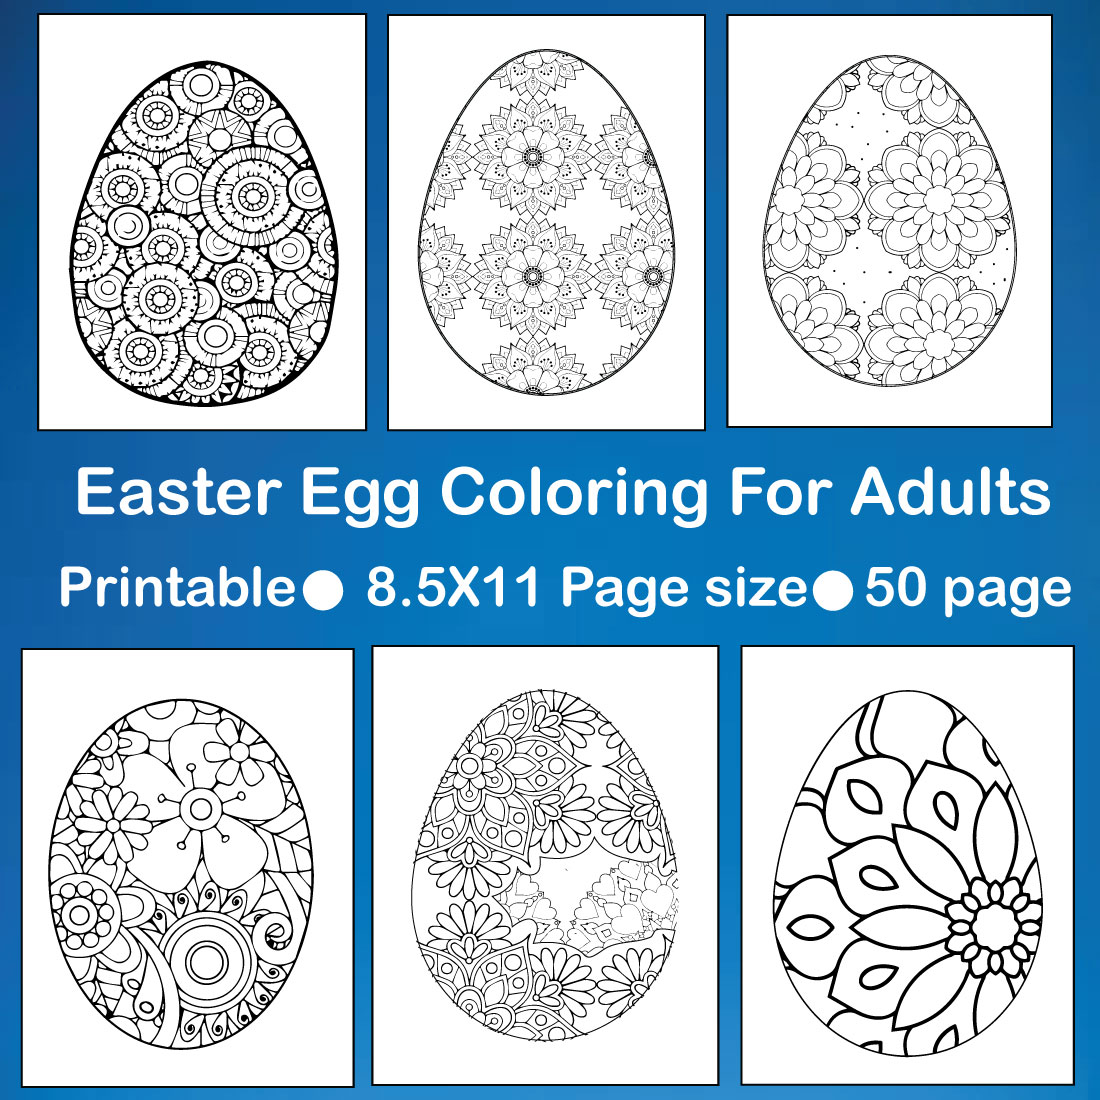 50 Mandala Cute Easter Coloring Pages For Adults cover image.